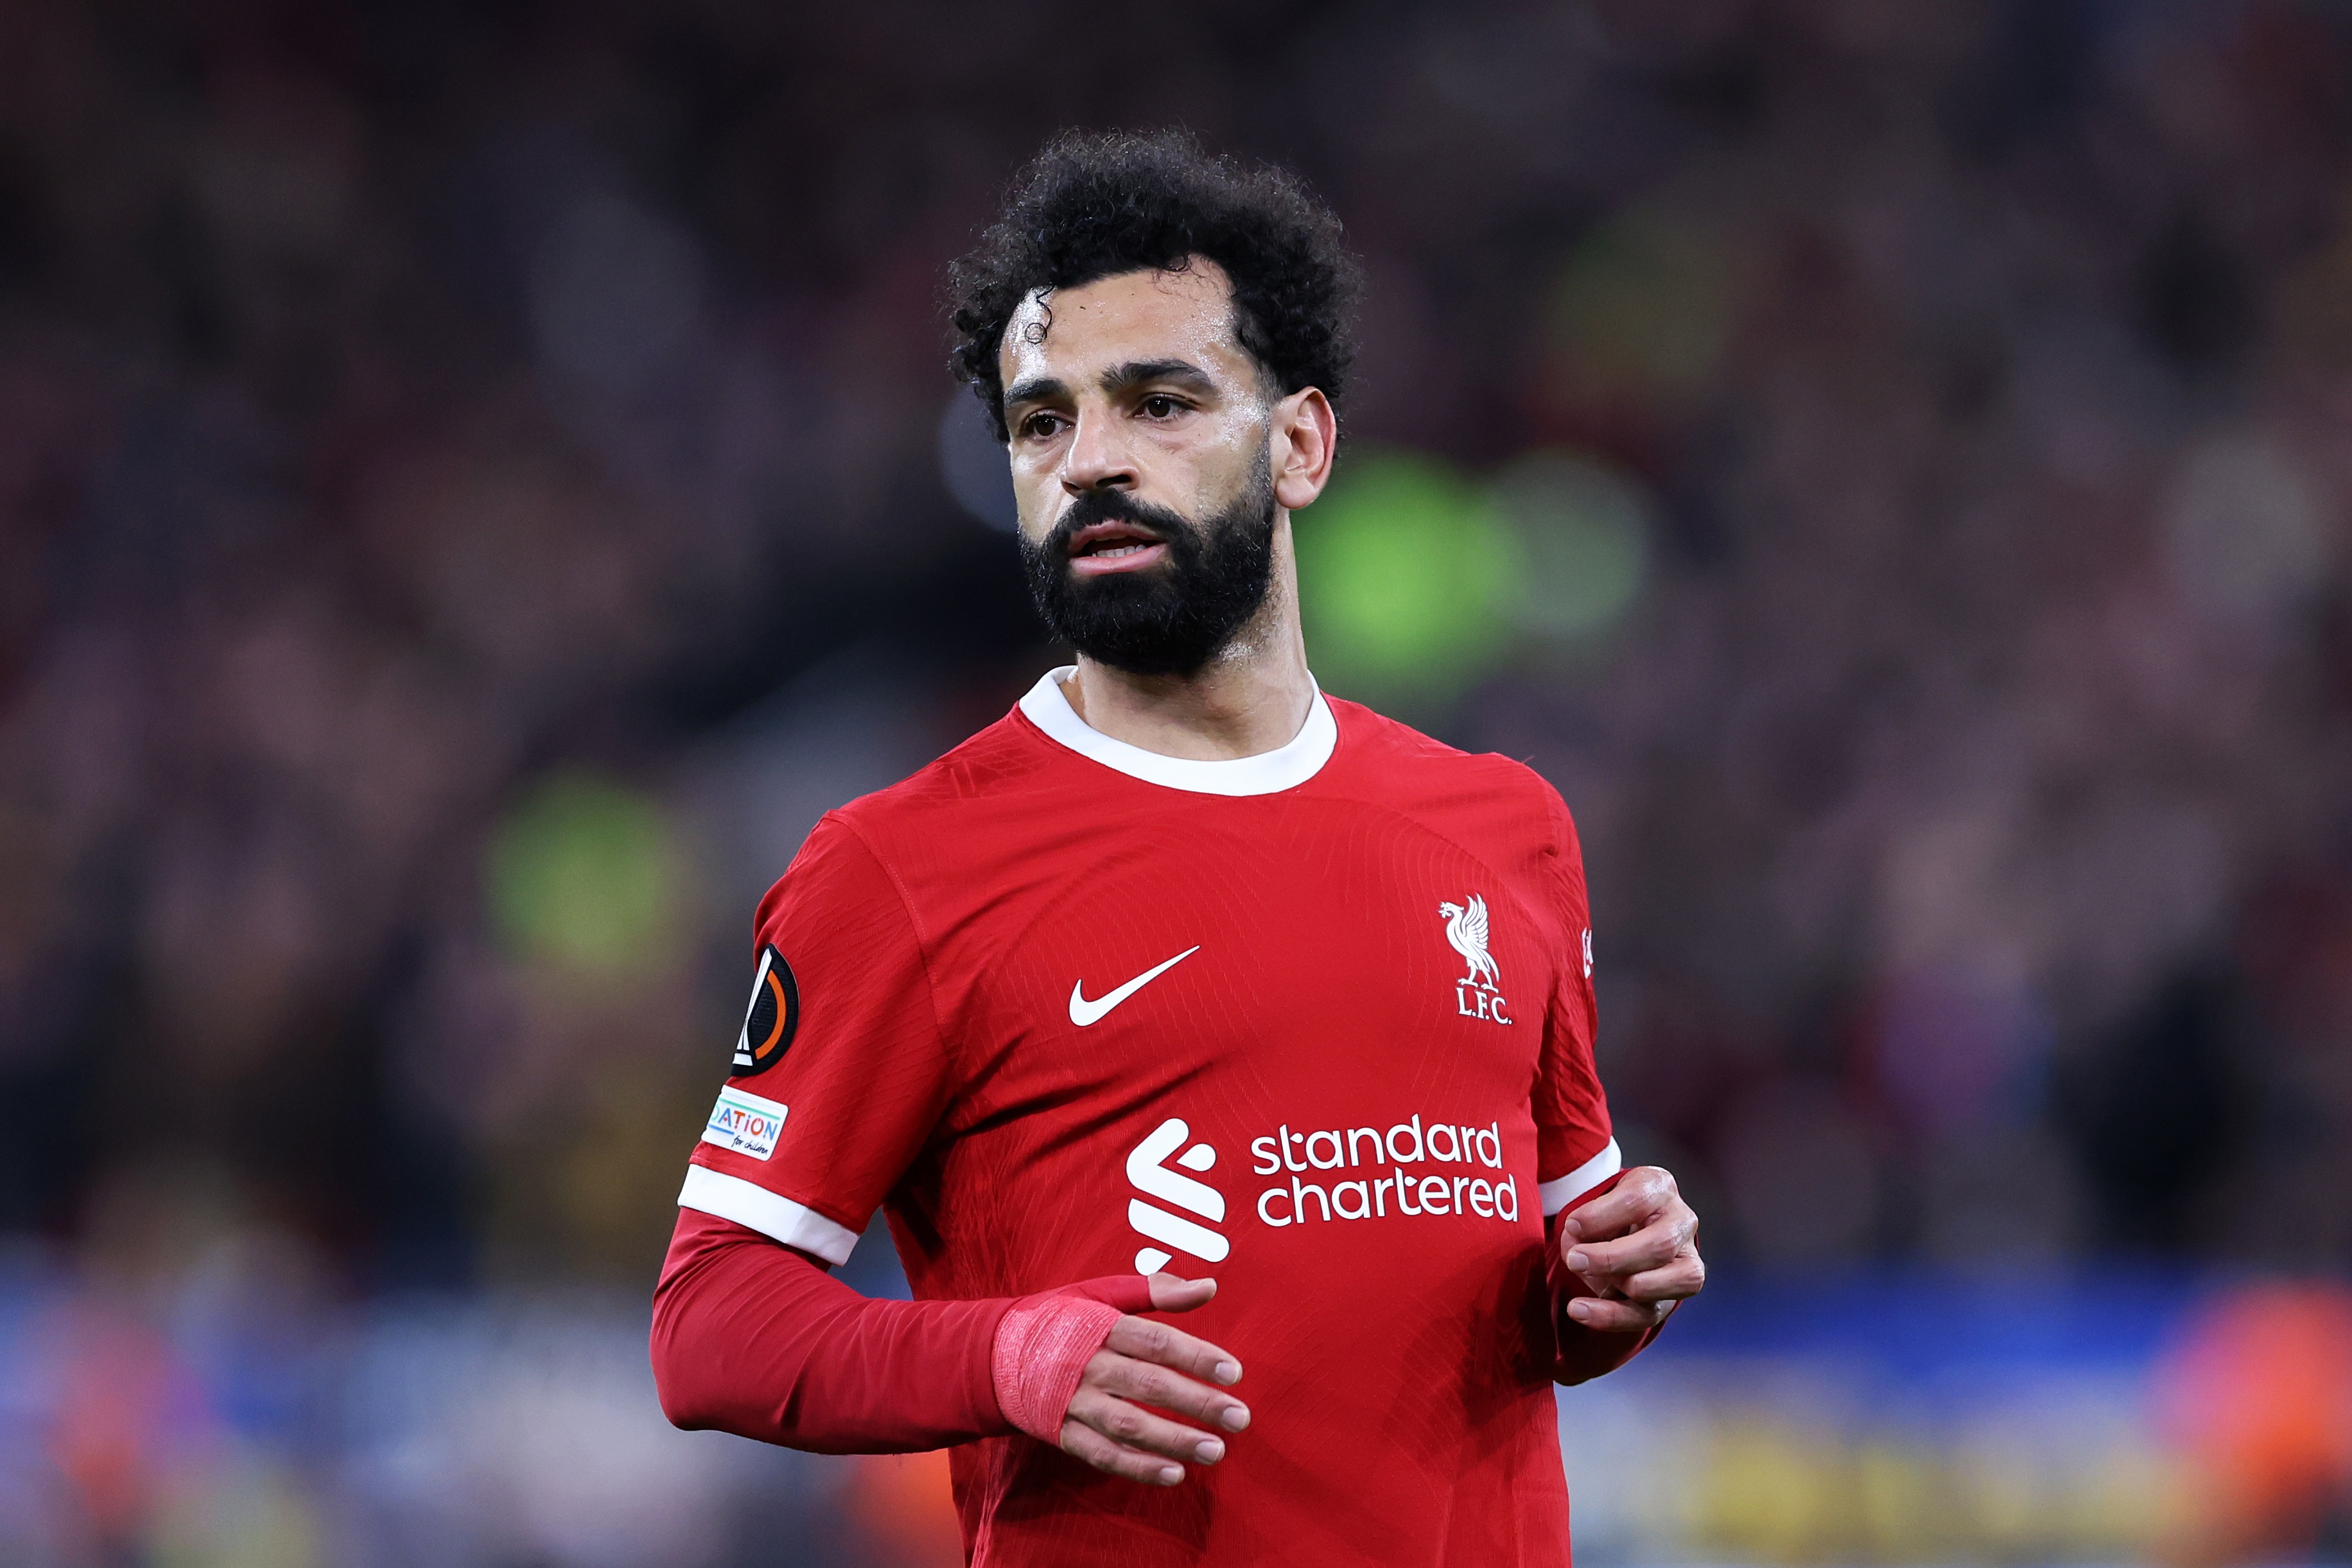 What: Mo Salah just secured Liverpool record that should have been impossible